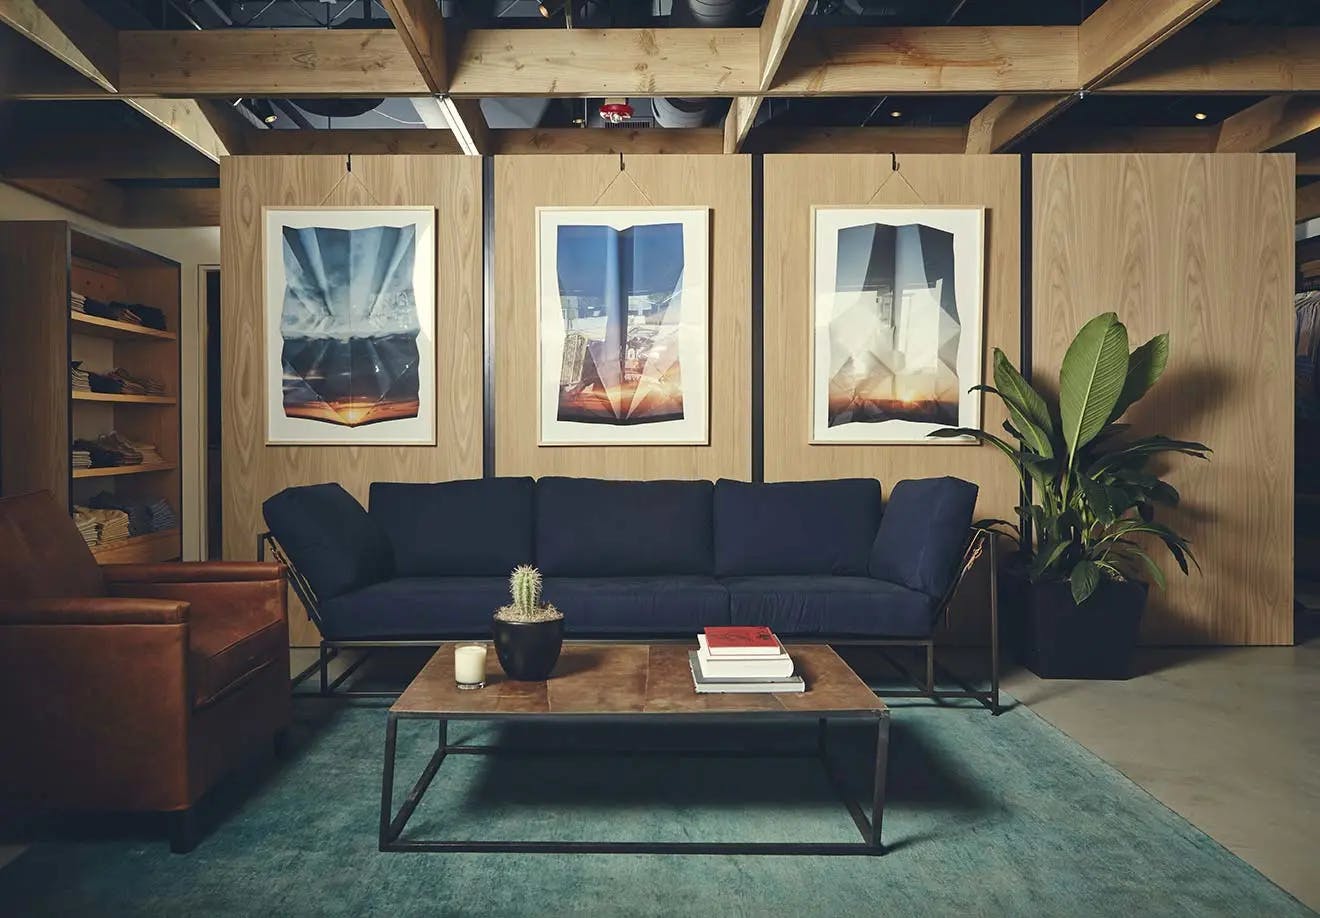 Three framed photographs of cloudy skies by artist Millee Tibbs on a wood wall above a blue sofa at a Bonobos store in Los Angeles.